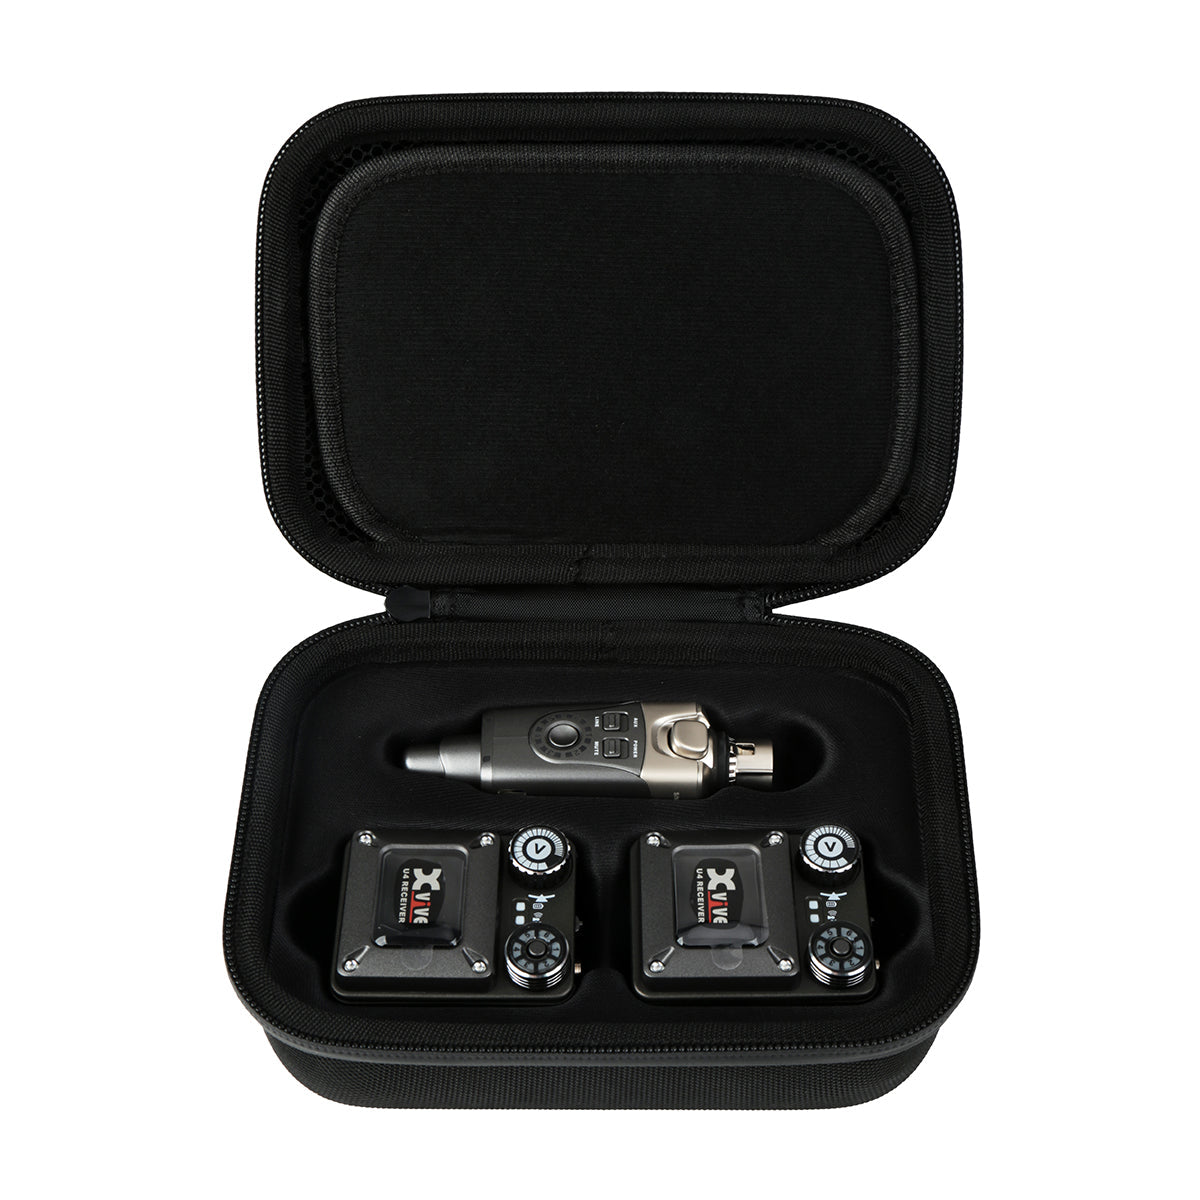 Xvive Travel Case for U4R2 In-Ear Monitor Wireless System (2 Receivers), Travel Case for sale at Richards Guitars.